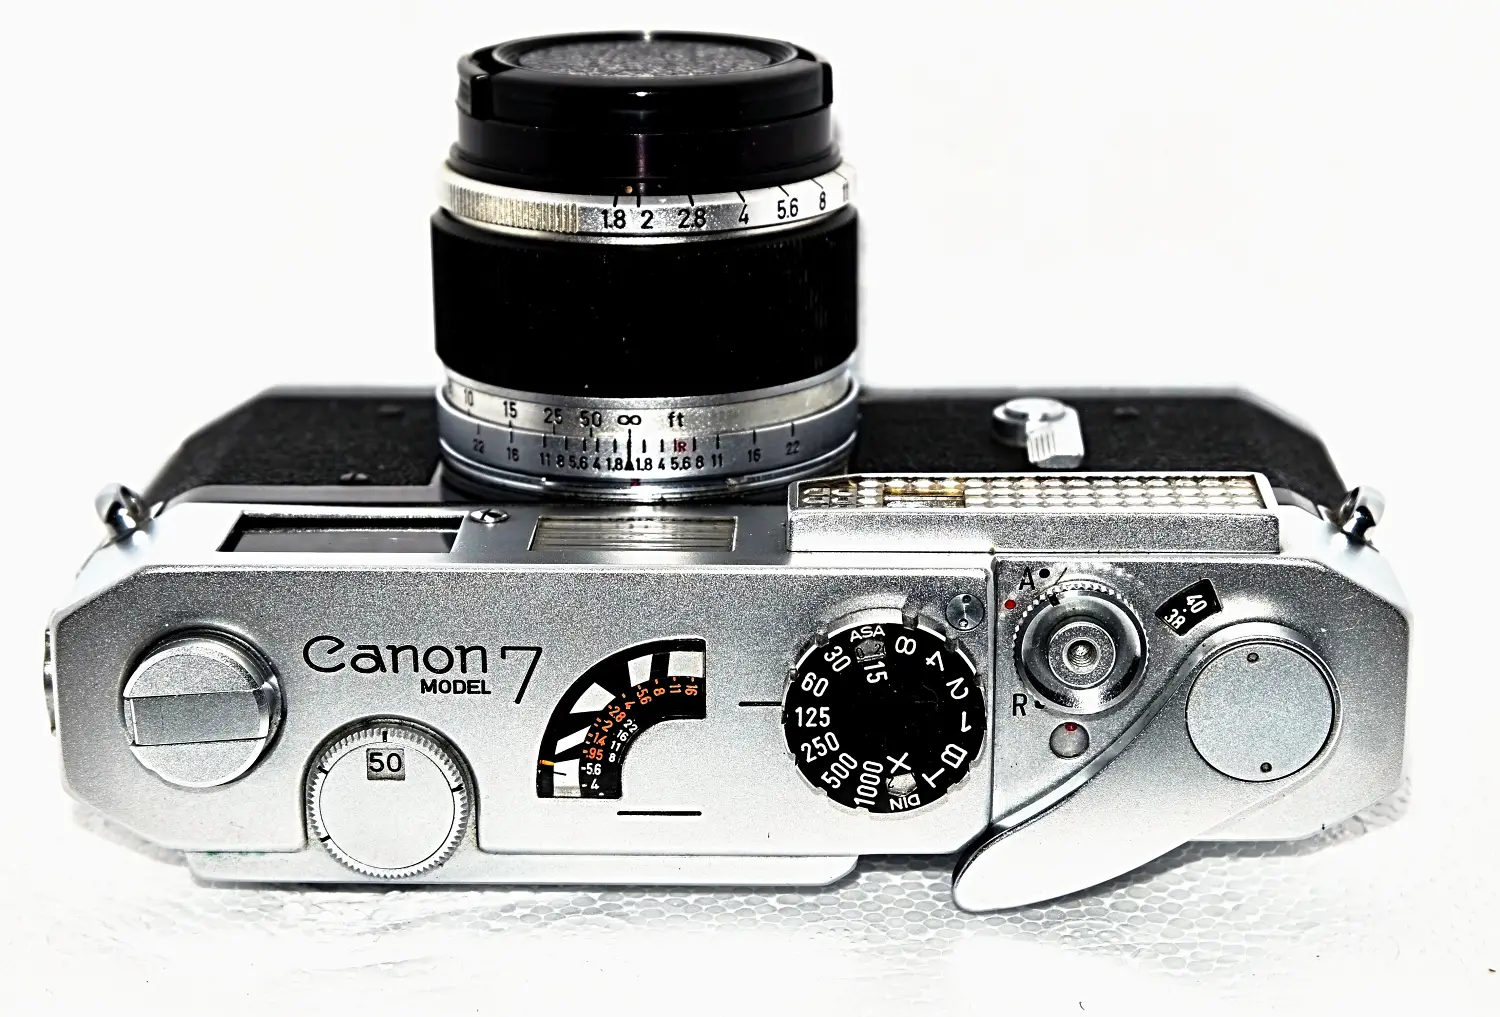 Canon 7 Review - by Terry B. - 35mmc